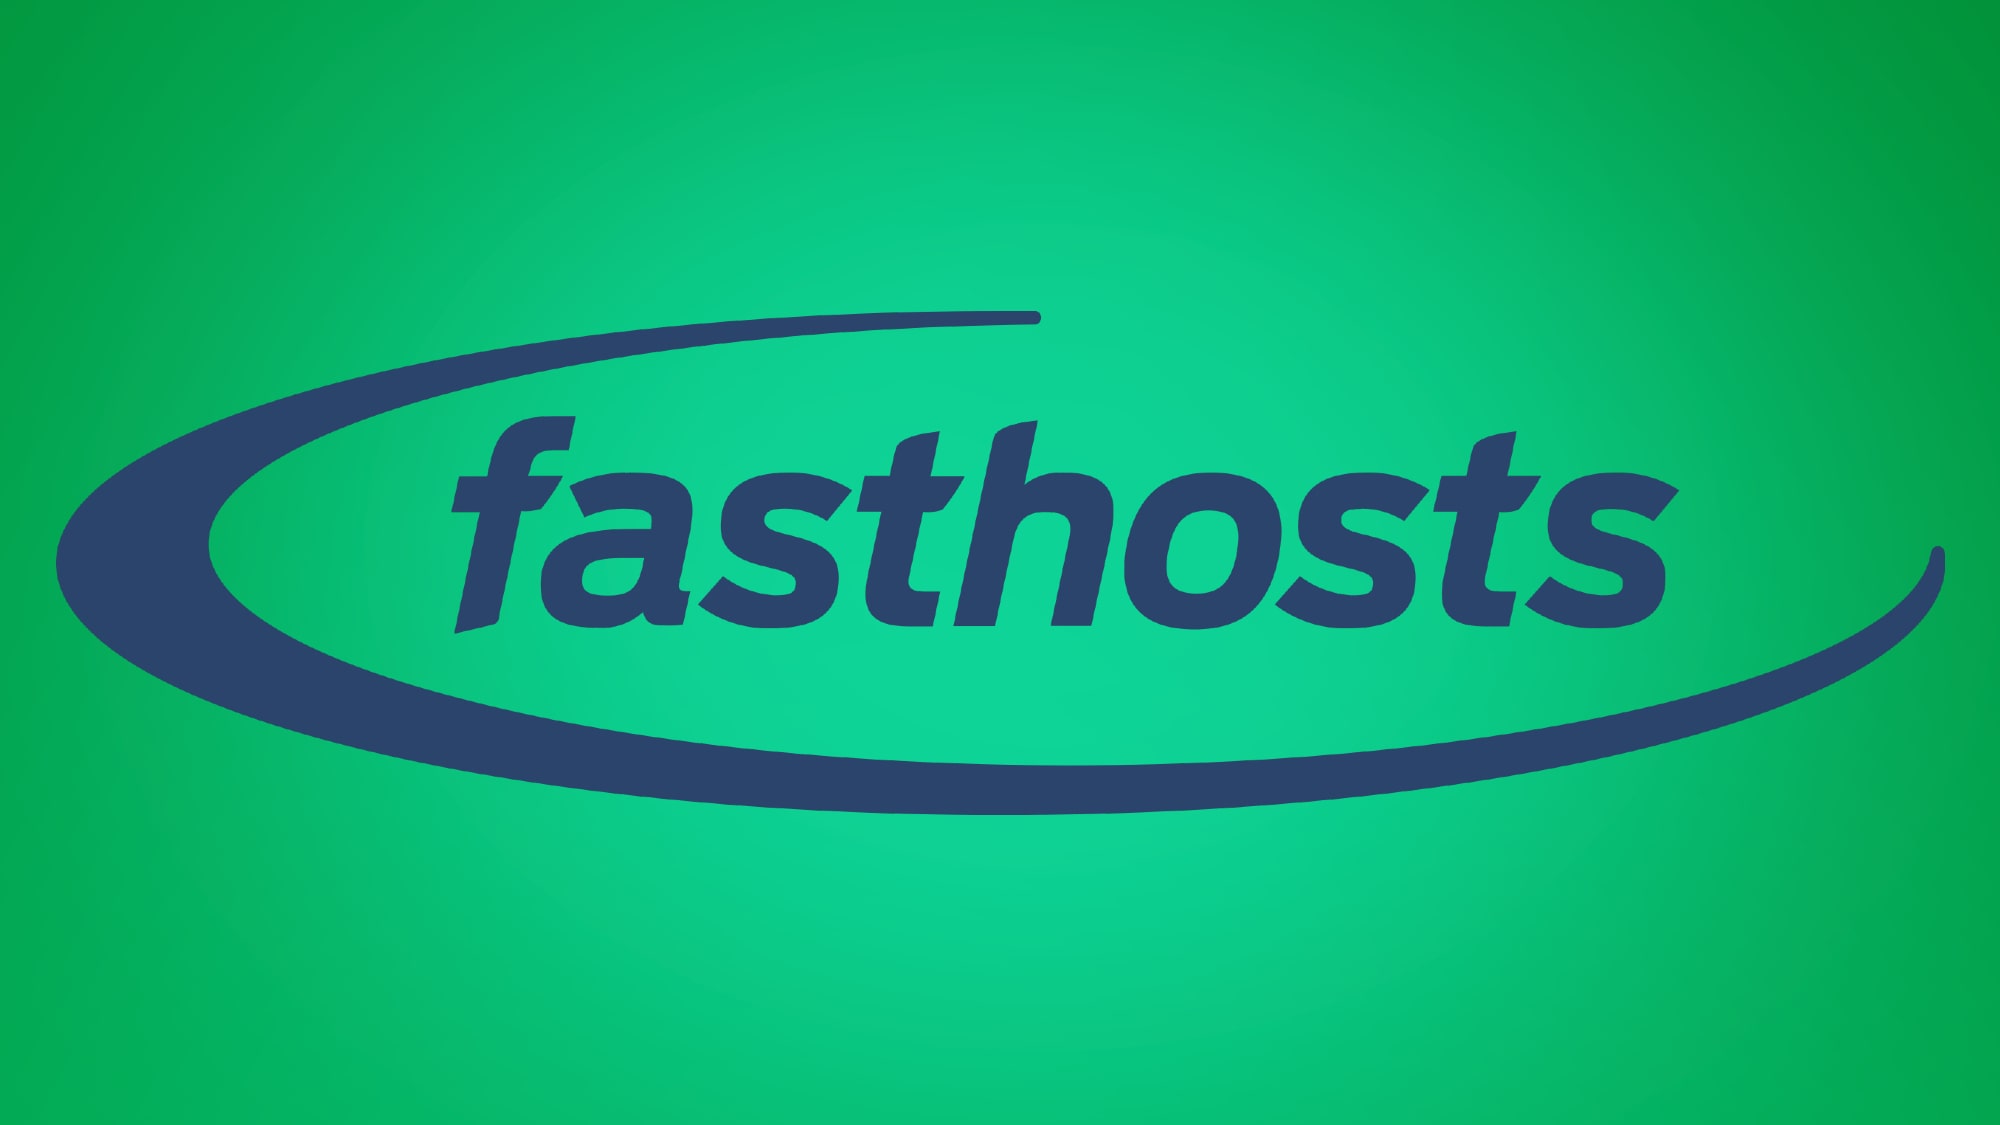 Fasthosts logo on green background